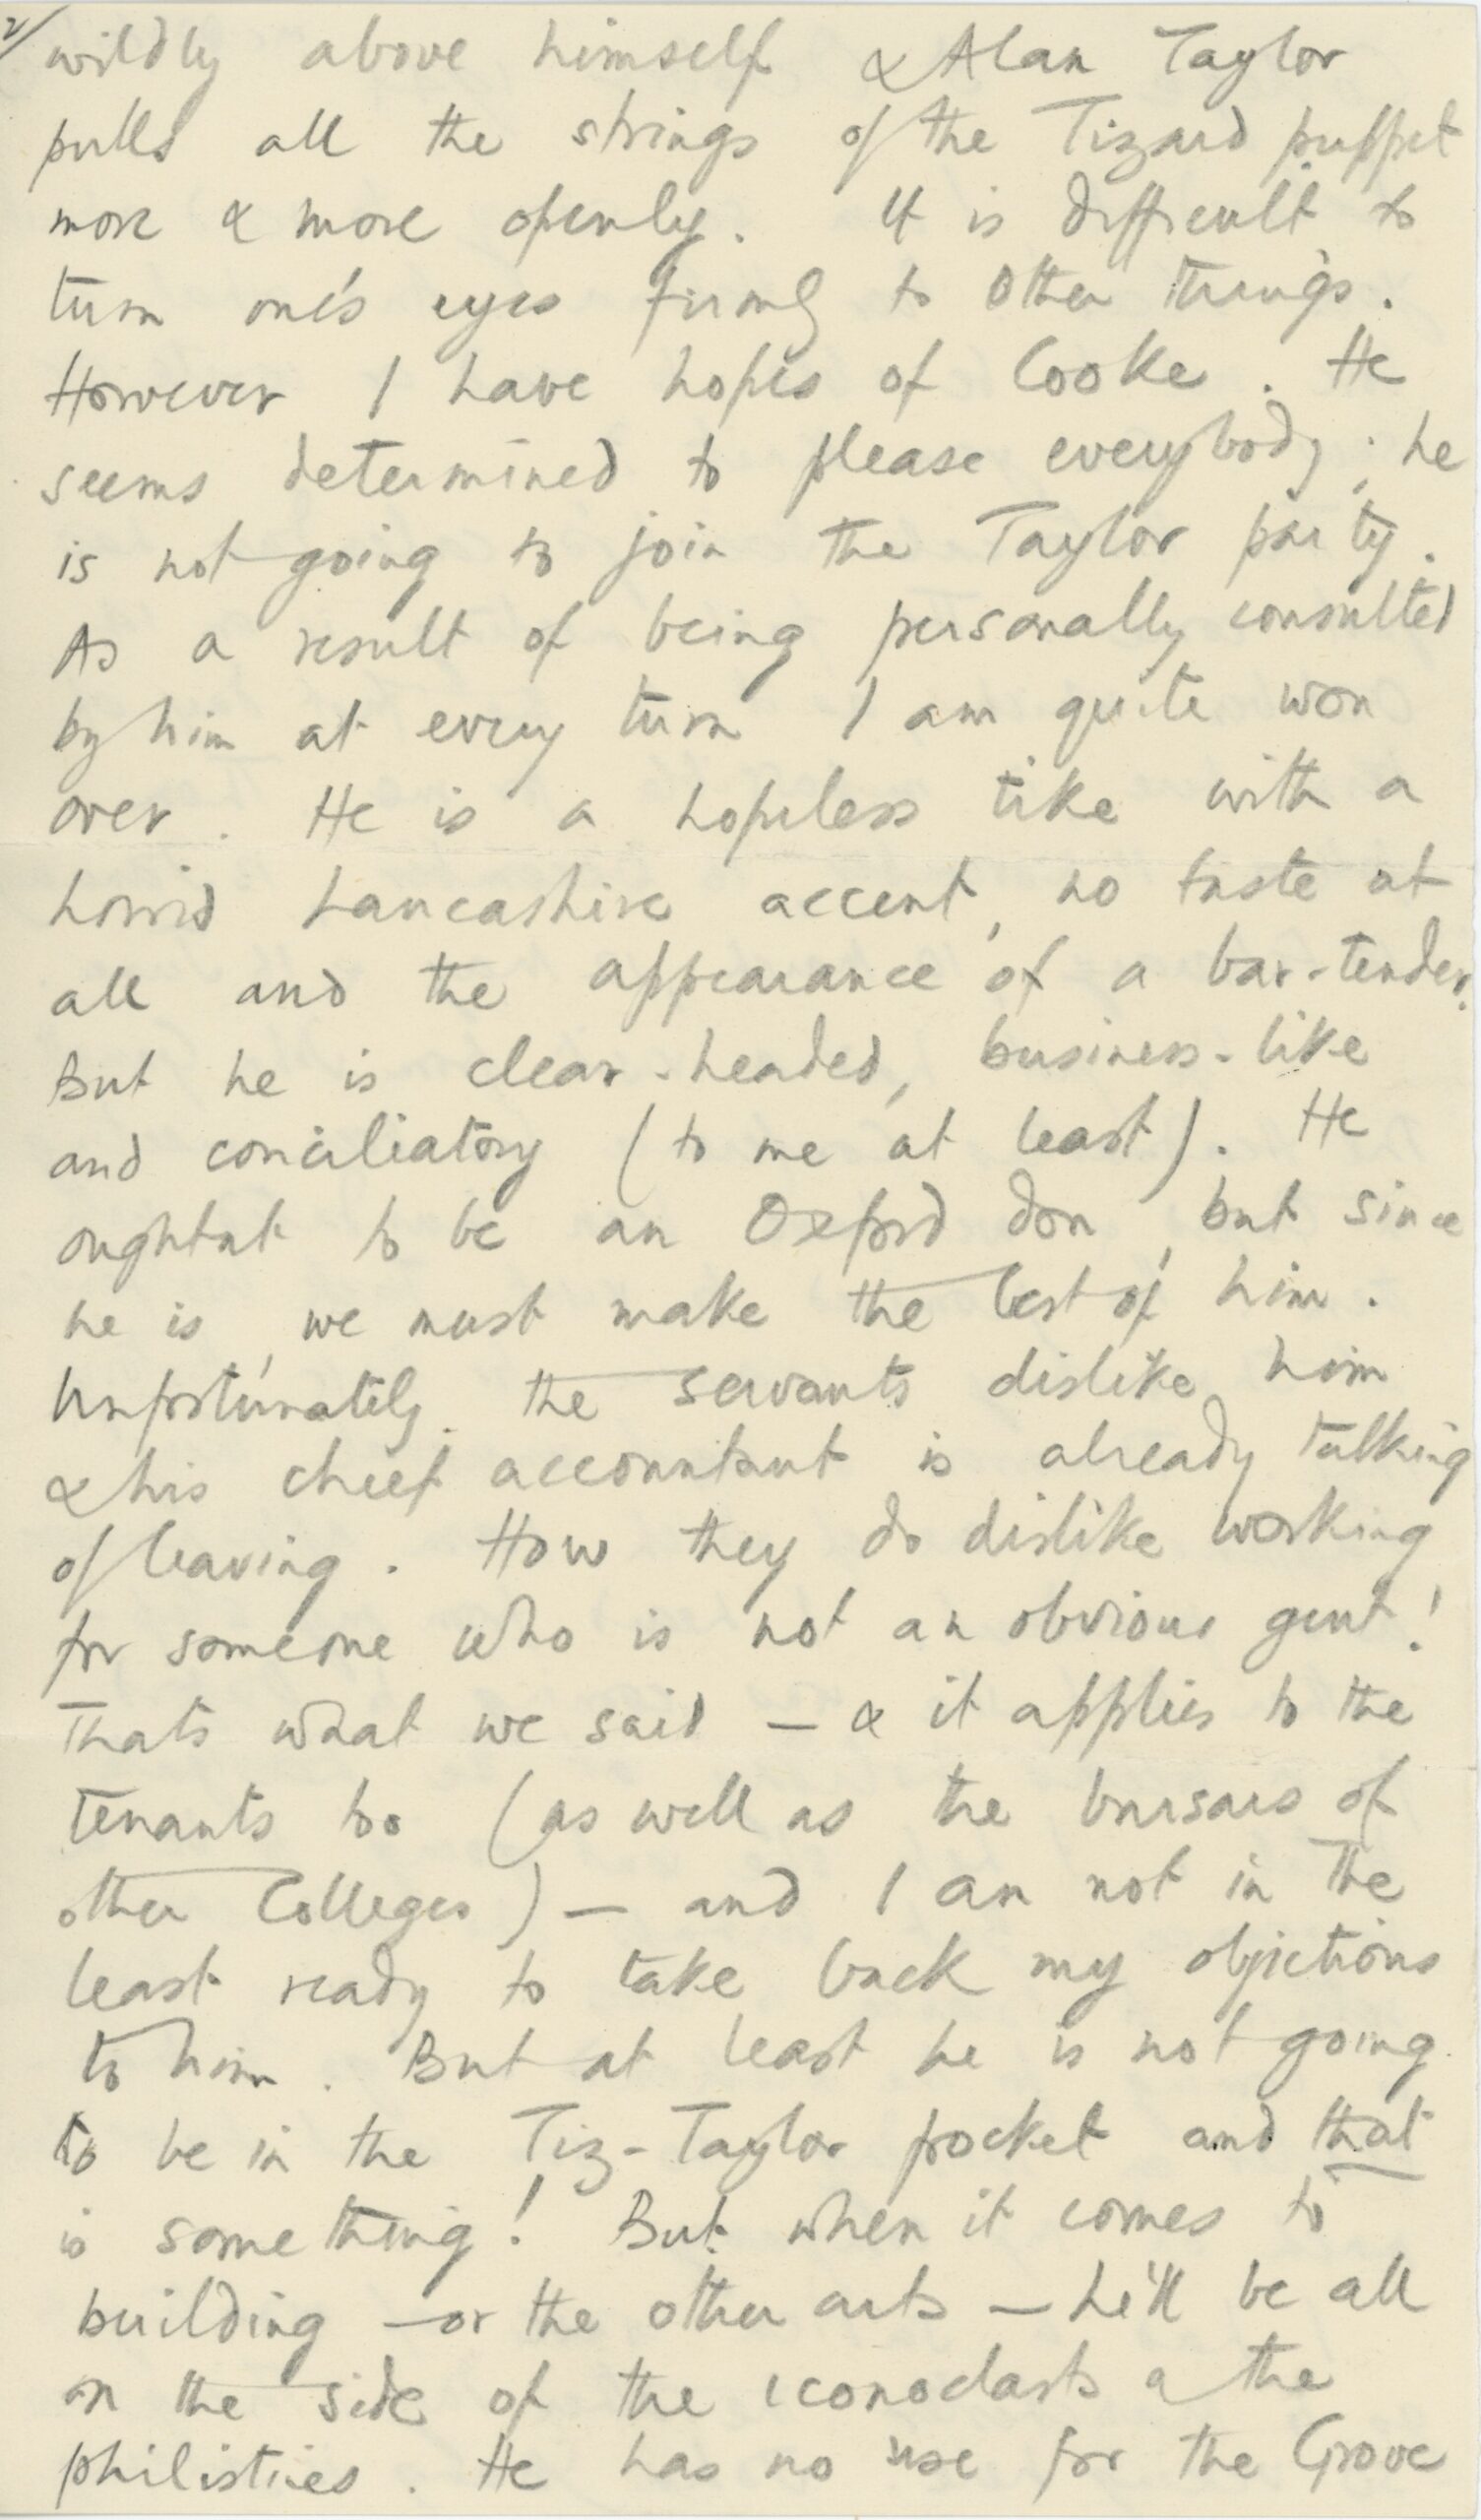 Page 2 of a handwritten letter on a small sheet of paper. The text, written in pencil, reads: wildly above himself & Alan Taylor pulled all the strings of the Tizard puppet more & more openly. It is difficult to turn one’s eyes [????] to other things. However, I have hopes of Cooke. He seems determined to please everybody; he is not going to join the Taylor party. As a result of being personally consulted by him at every turn I am quite won over. He is a hopeless tike with a horrid Lancashire accent, no taste at all and the appearance of a bar-tender. But he is clear-headed, business-like and conciliatory (to me at least). He oughtn’t to be an Oxford don, but since he is we must make the best of him. Unfortunately, the servants dislike him & his chief accountant is already talking of leaving. How they do dislike working for someone who is not an obvious gent! That’s what we said— & it applies to the tenants too (as well as the ????? of other Colleges) – and I am not in the least ready to take back my objections to him. But at least he is not going to be in the Tiz-Taylor pocket and that is something! But when it comes to building—or the other ??? – he’ll be all on the side of the iconoclasts & the philistines. He has no use for The Grove